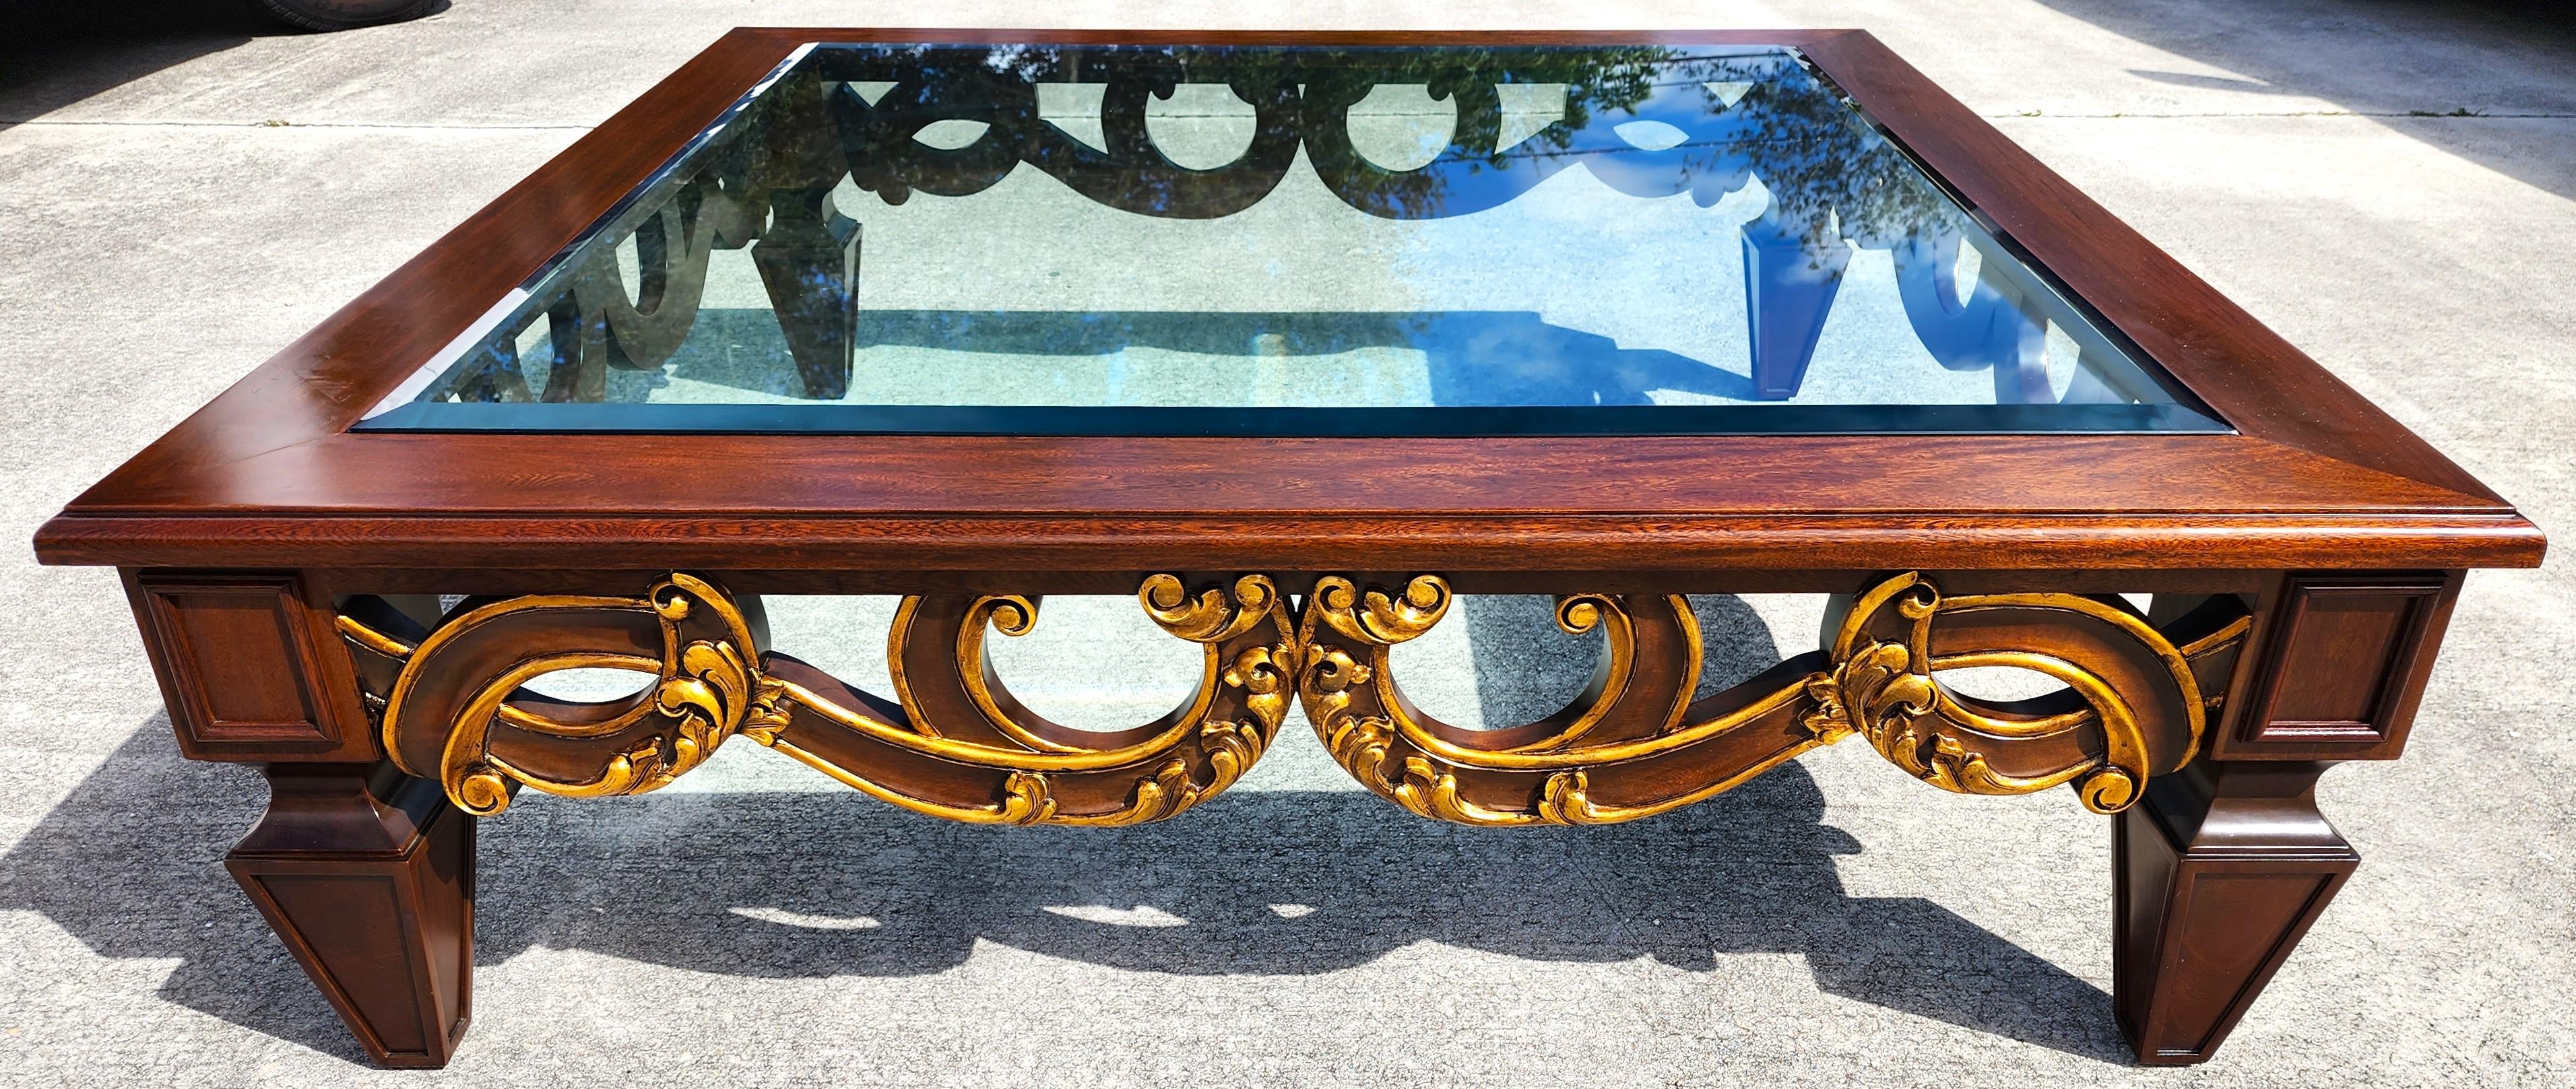 For FULL item description click on CONTINUE READING at the bottom of this page.
Offering One Of Our Recent Palm Beach Estate Fine Furniture Acquisitions Of A
Vintage French Provincial Solid Wood Gold Scroll Coffee Cocktail Table
With a thick beveled